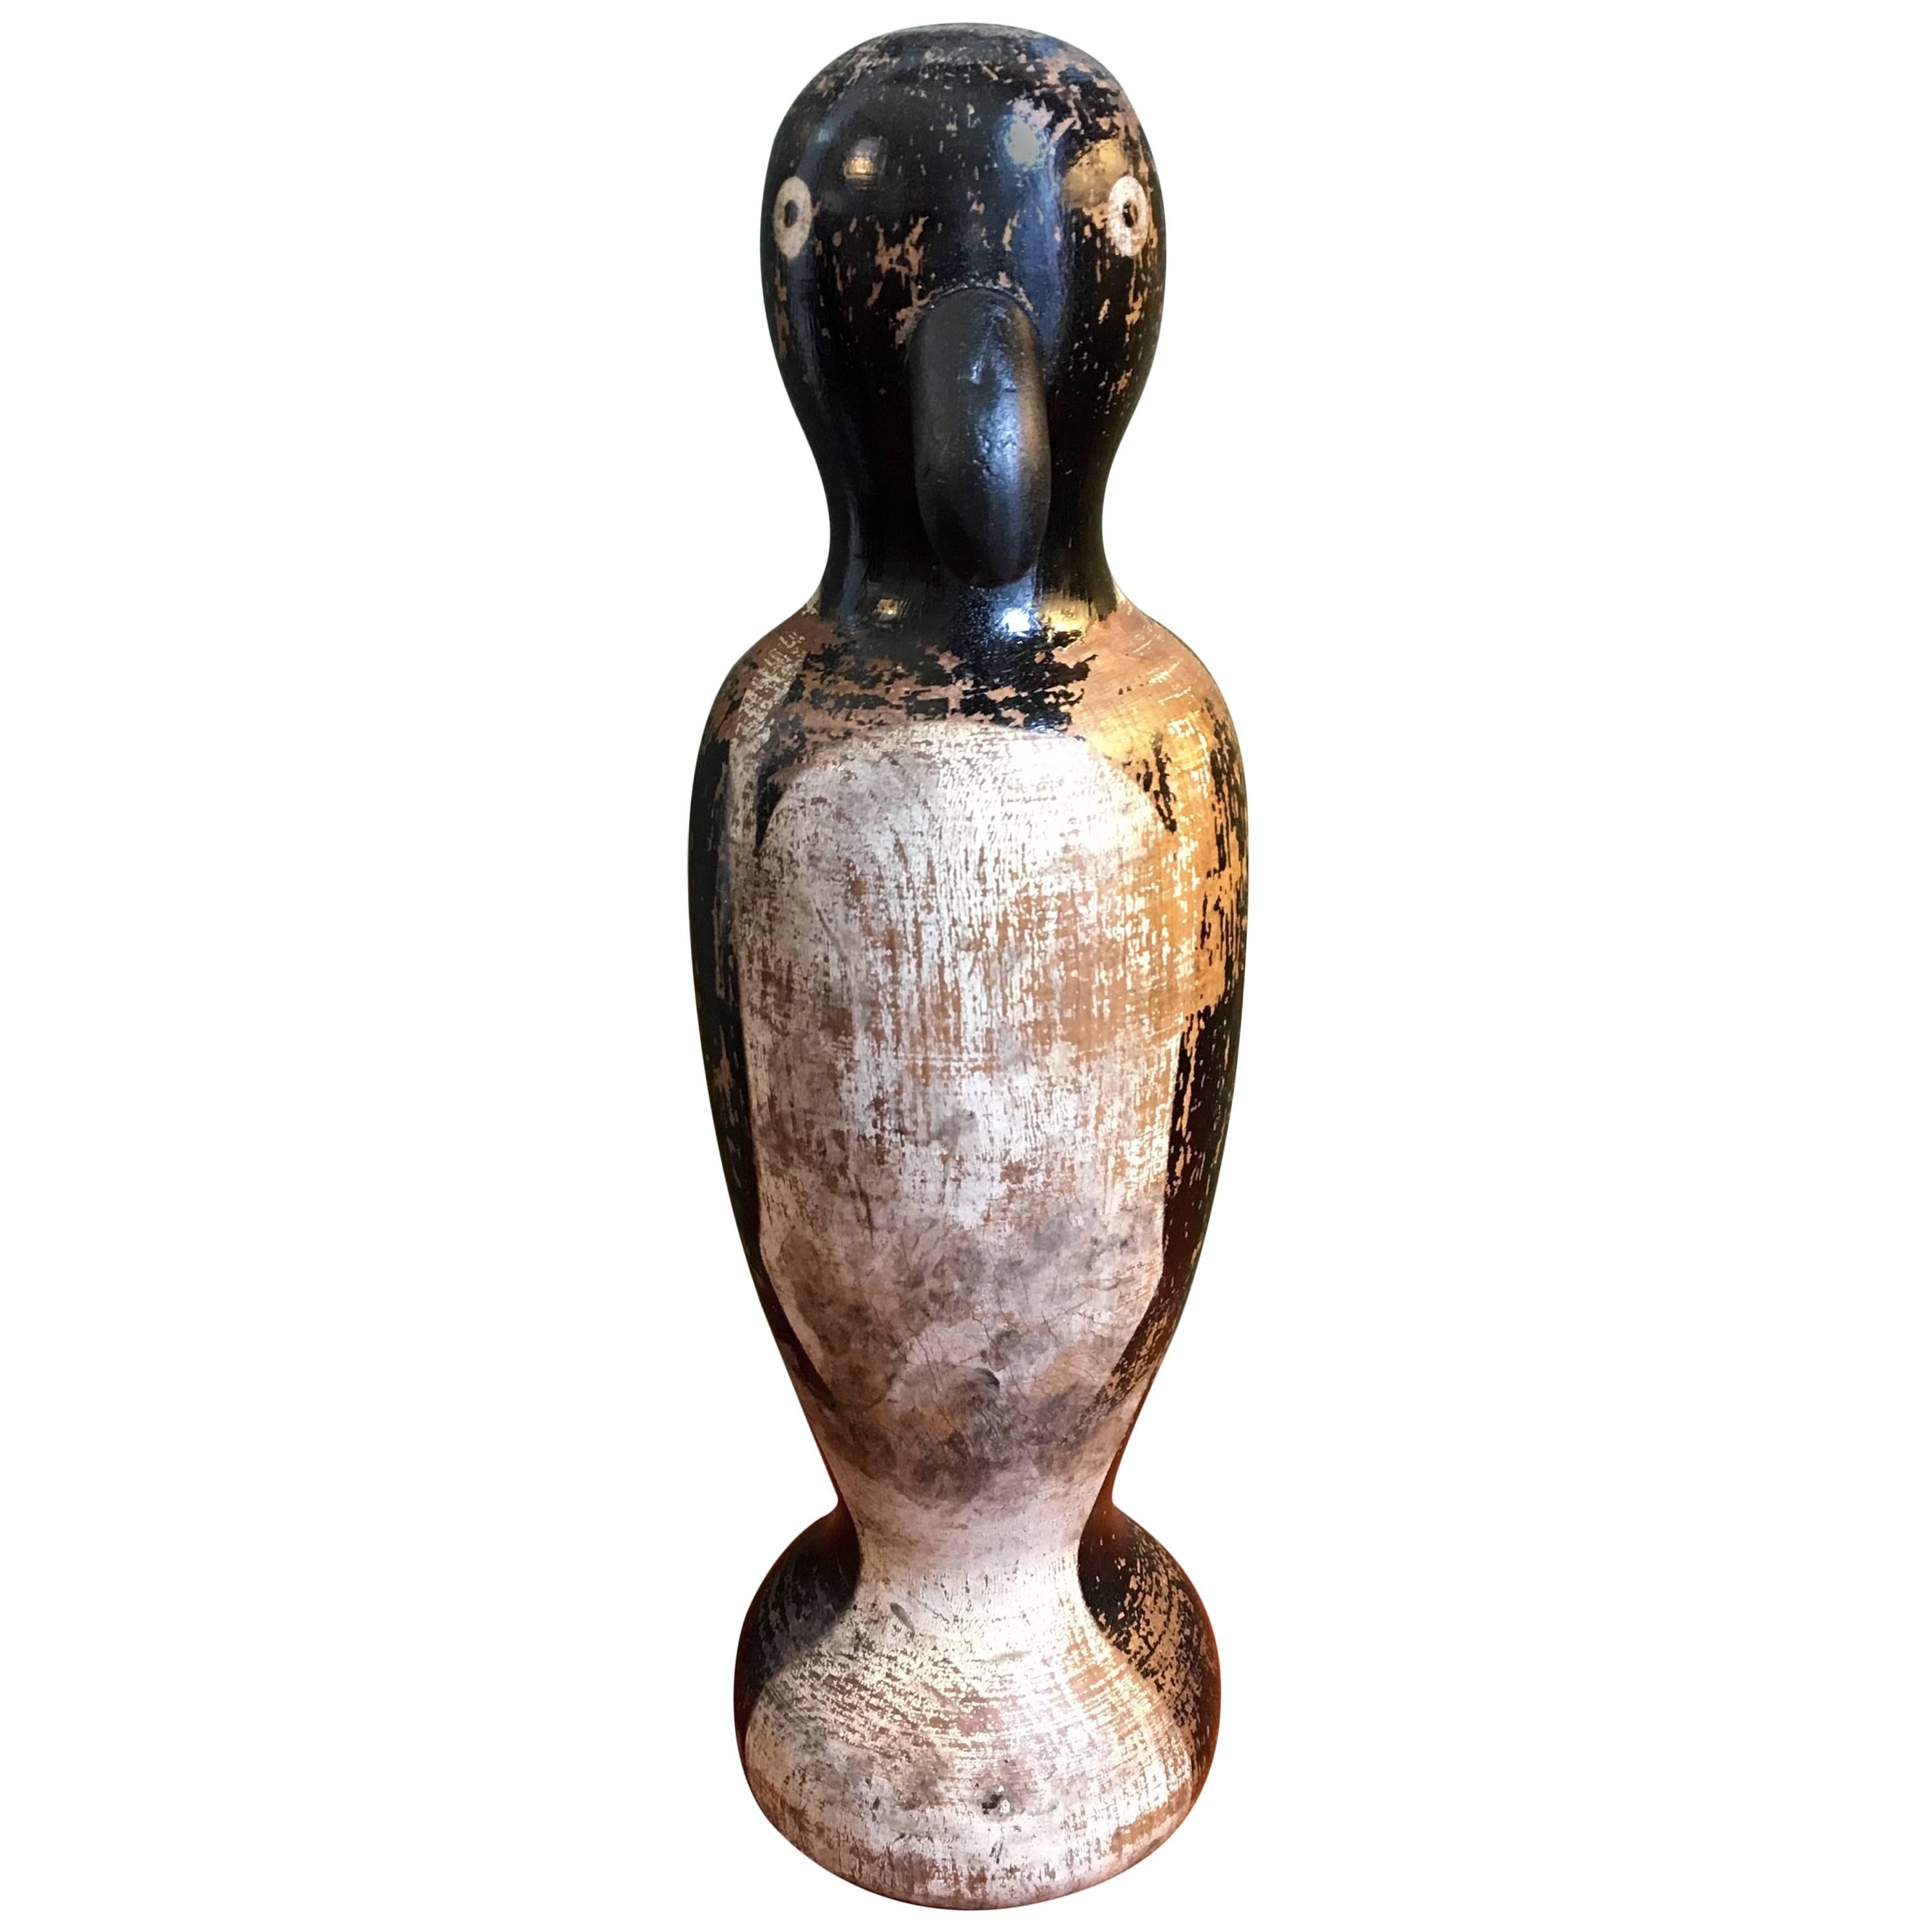 Folk Art Carved and Decorated Whimsical Penguin